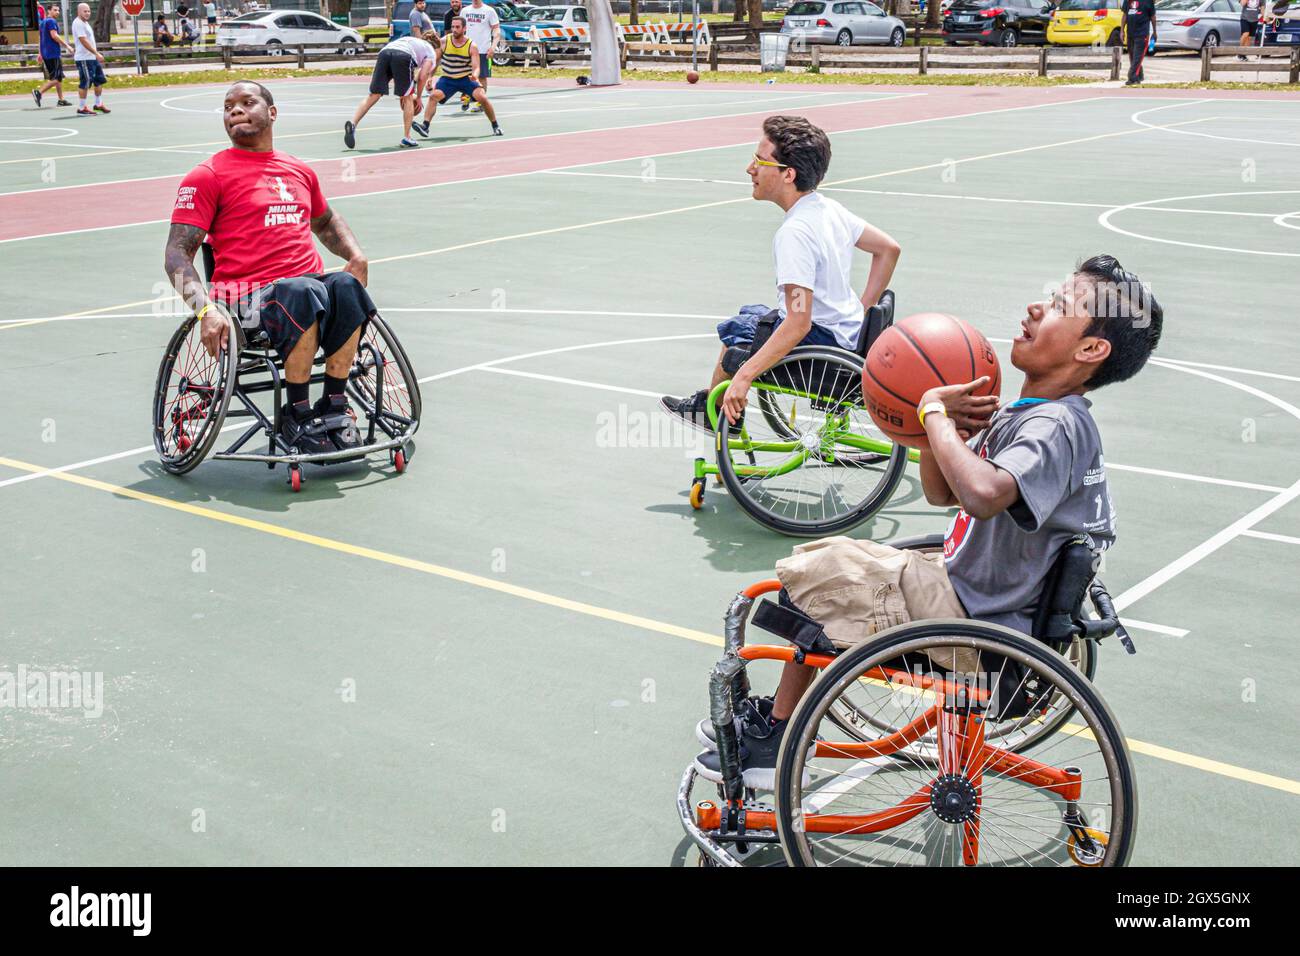 Miami Florida,Tropical Park,Paralympic Experience,sports playing active disabled basketball court wheelchair,Black Asian boy shooting baskets men male Stock Photo